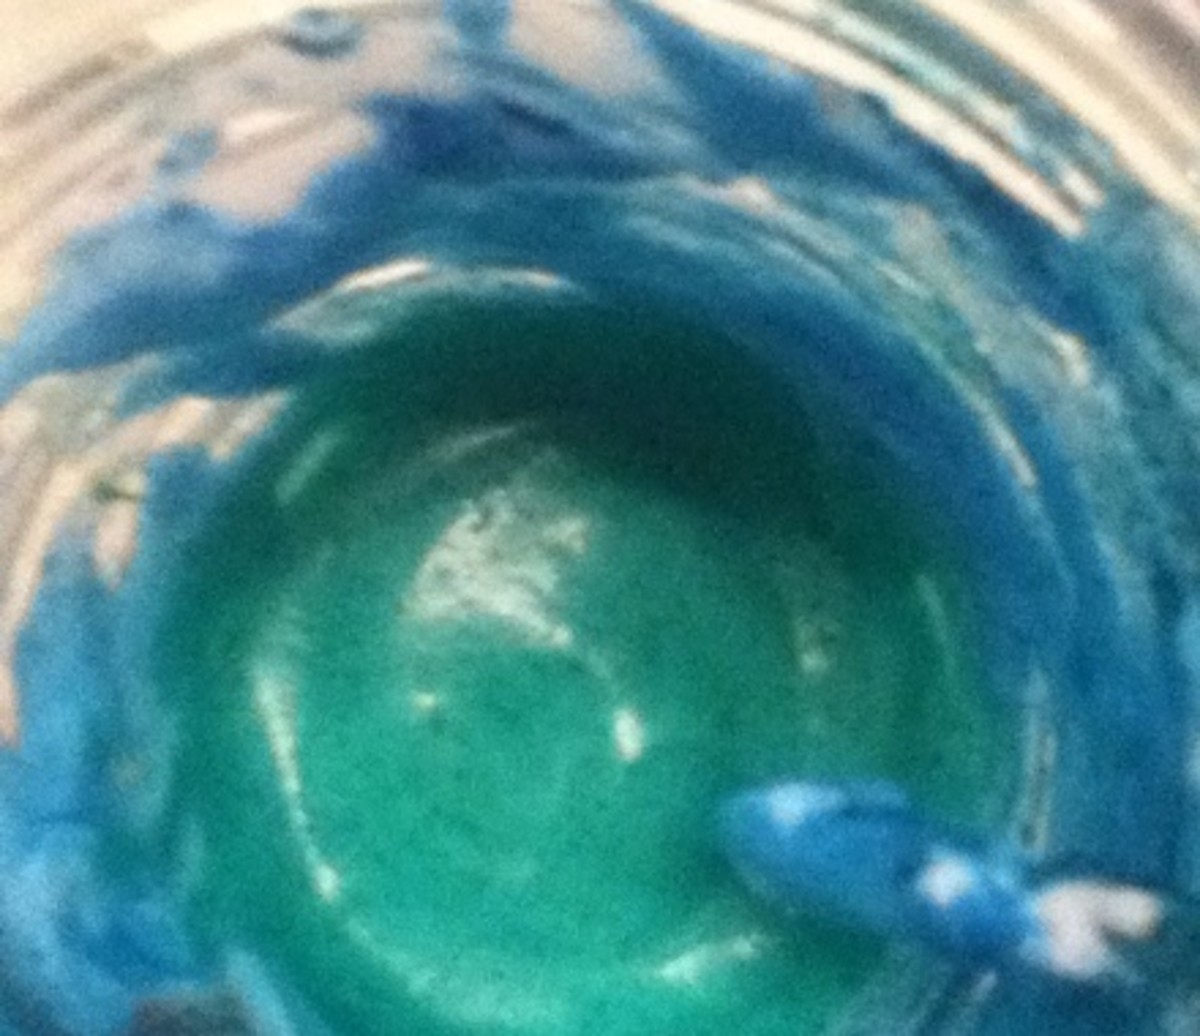 Conditioner and food coloring